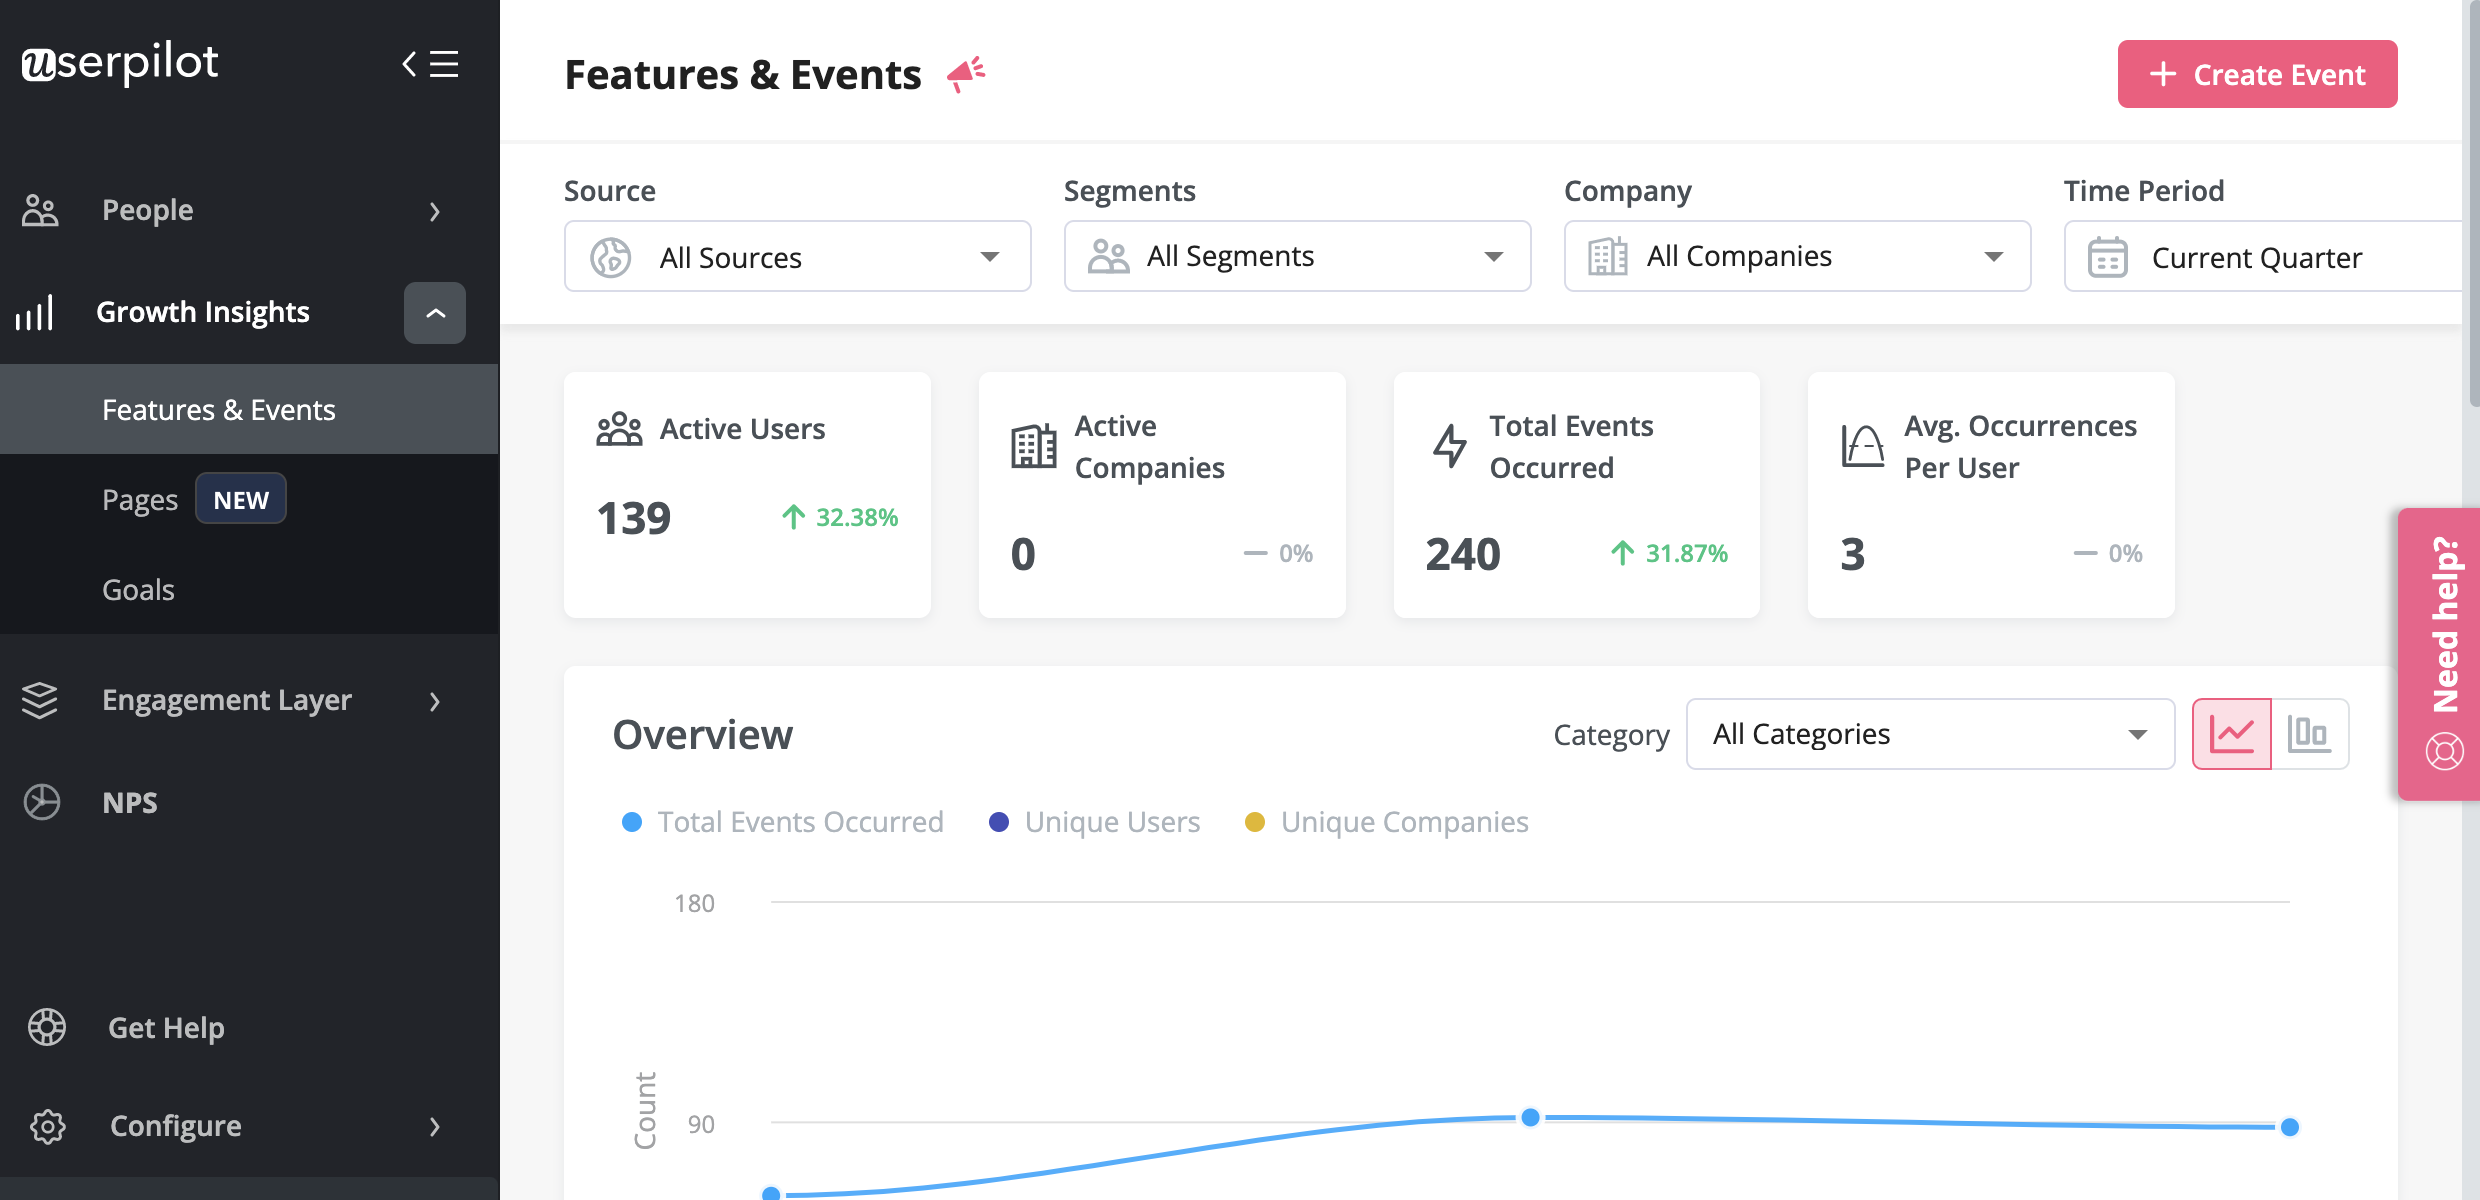 Userpilot Features & Events dashboard